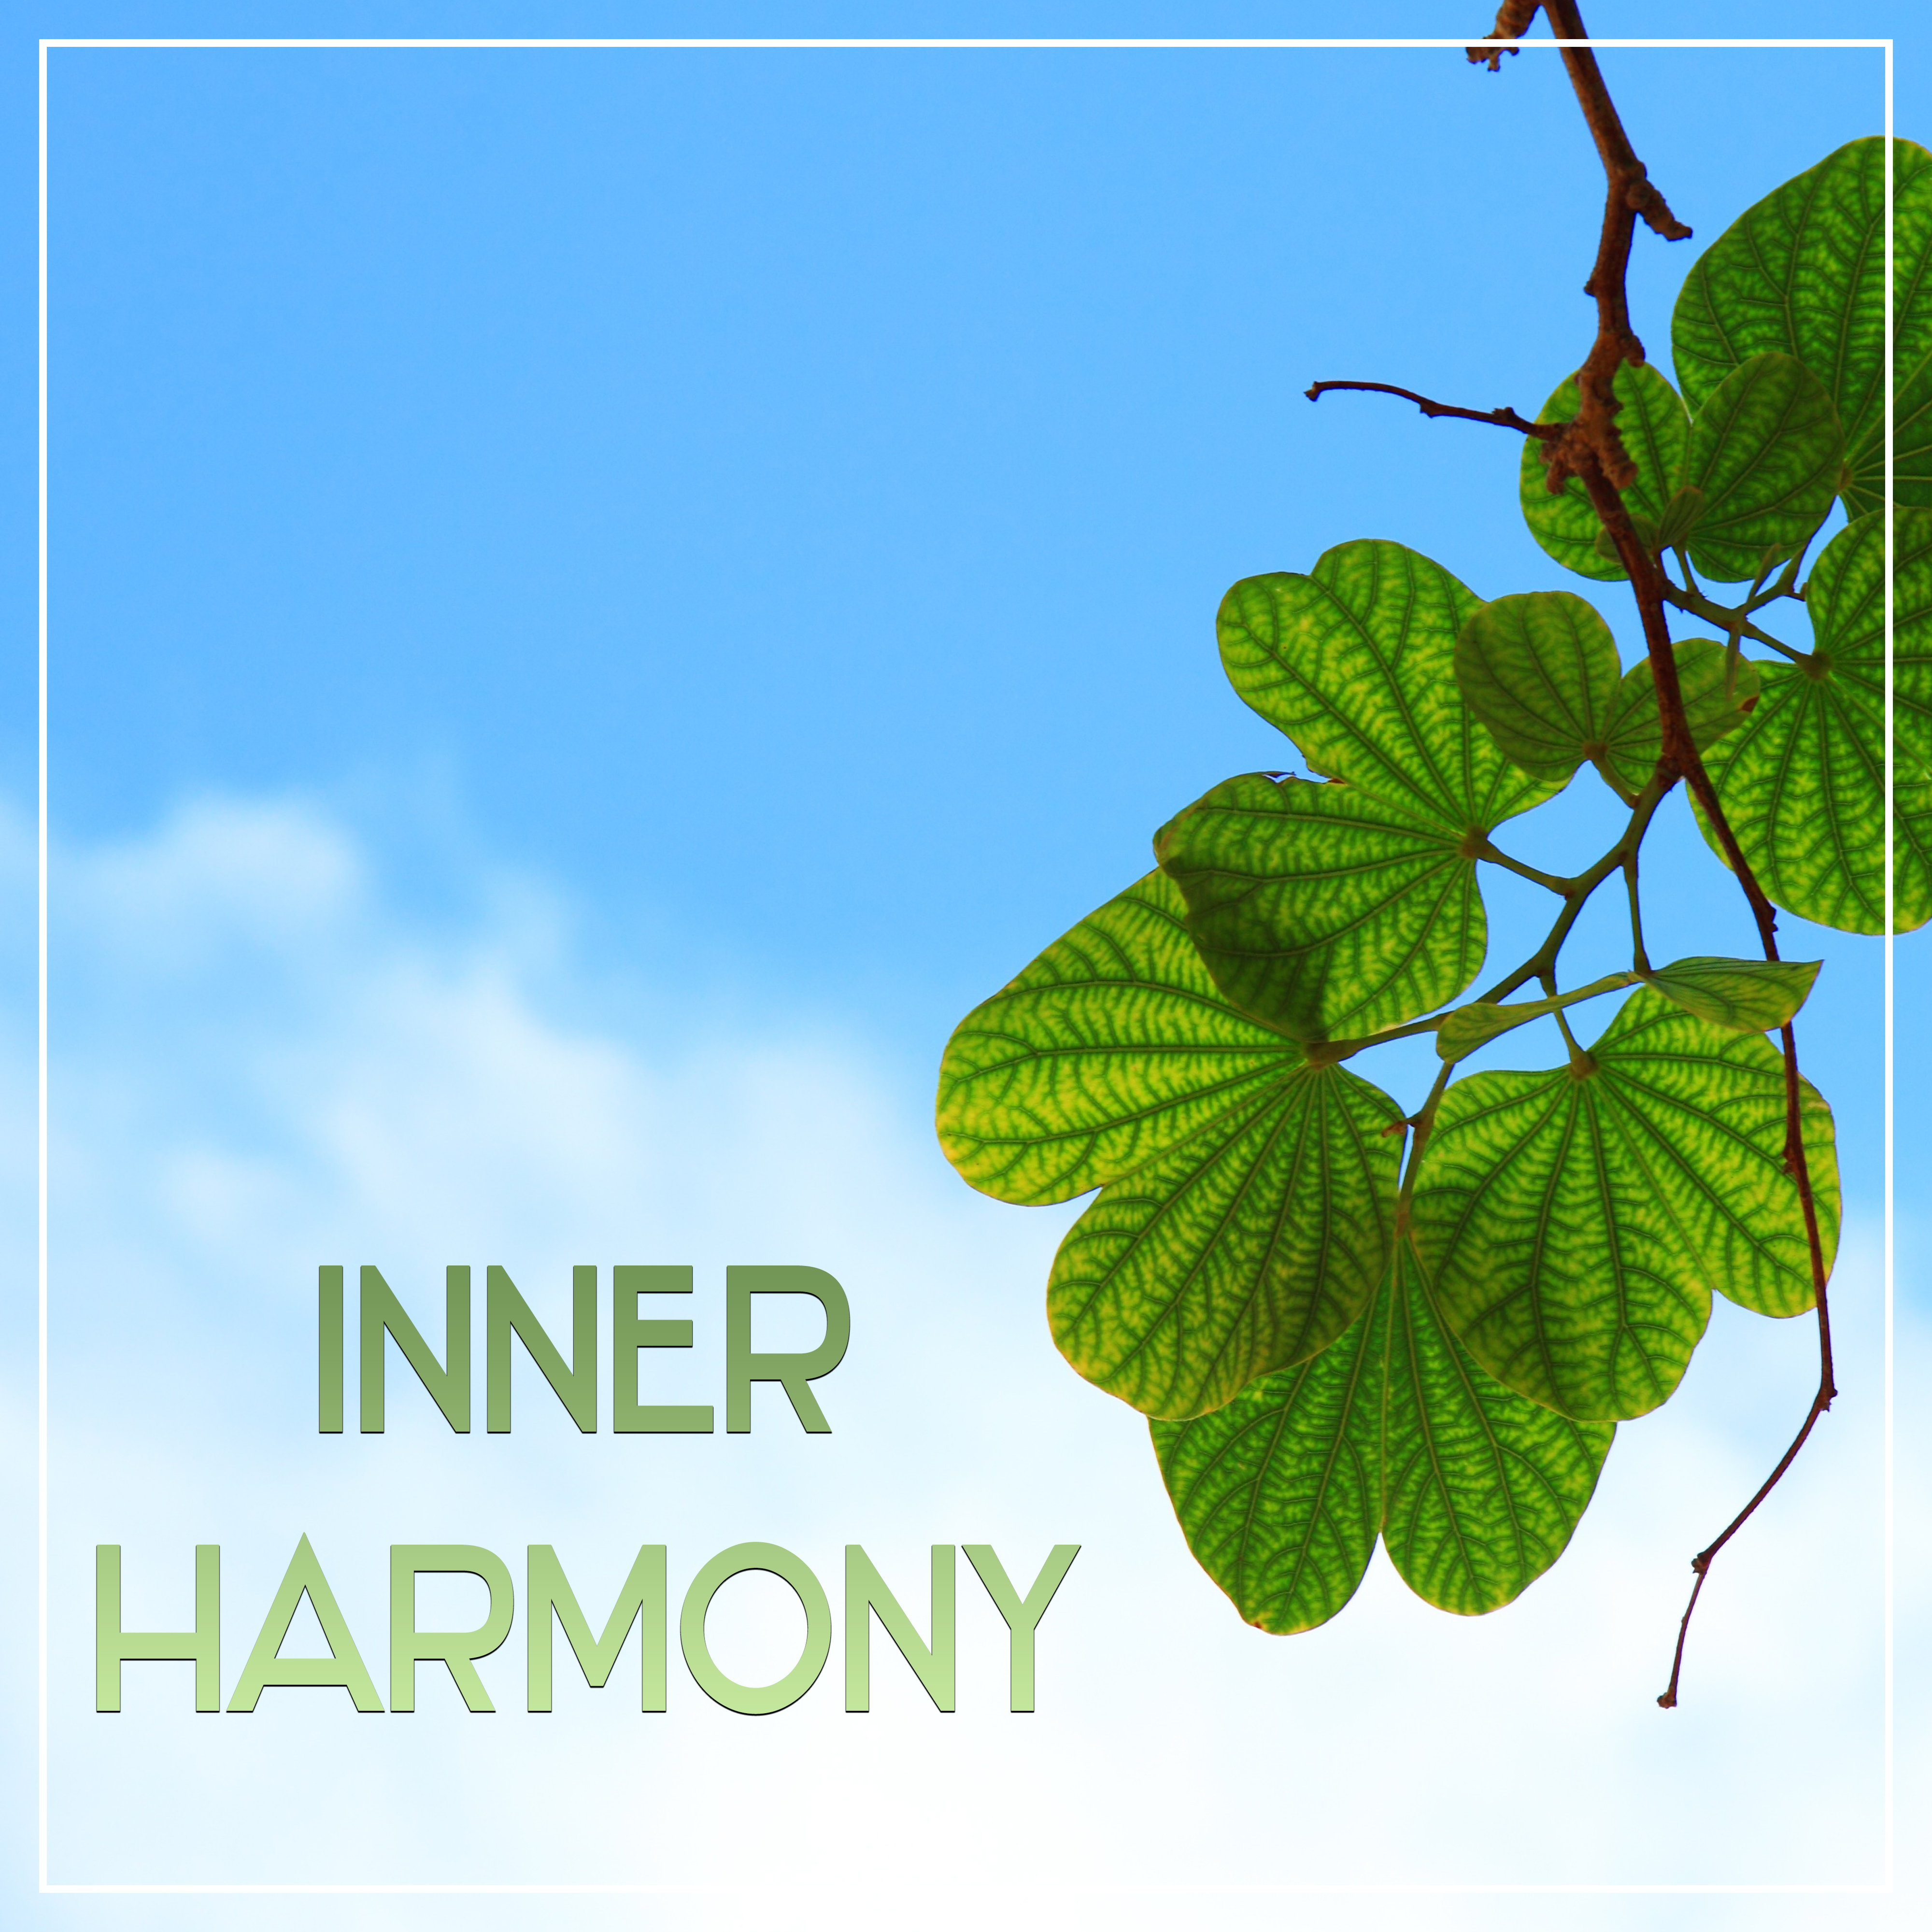 Inner Harmony  Music for Meditation, Yoga Sounds, Clear Mind, Calmness, Peaceful Melodies, Zen